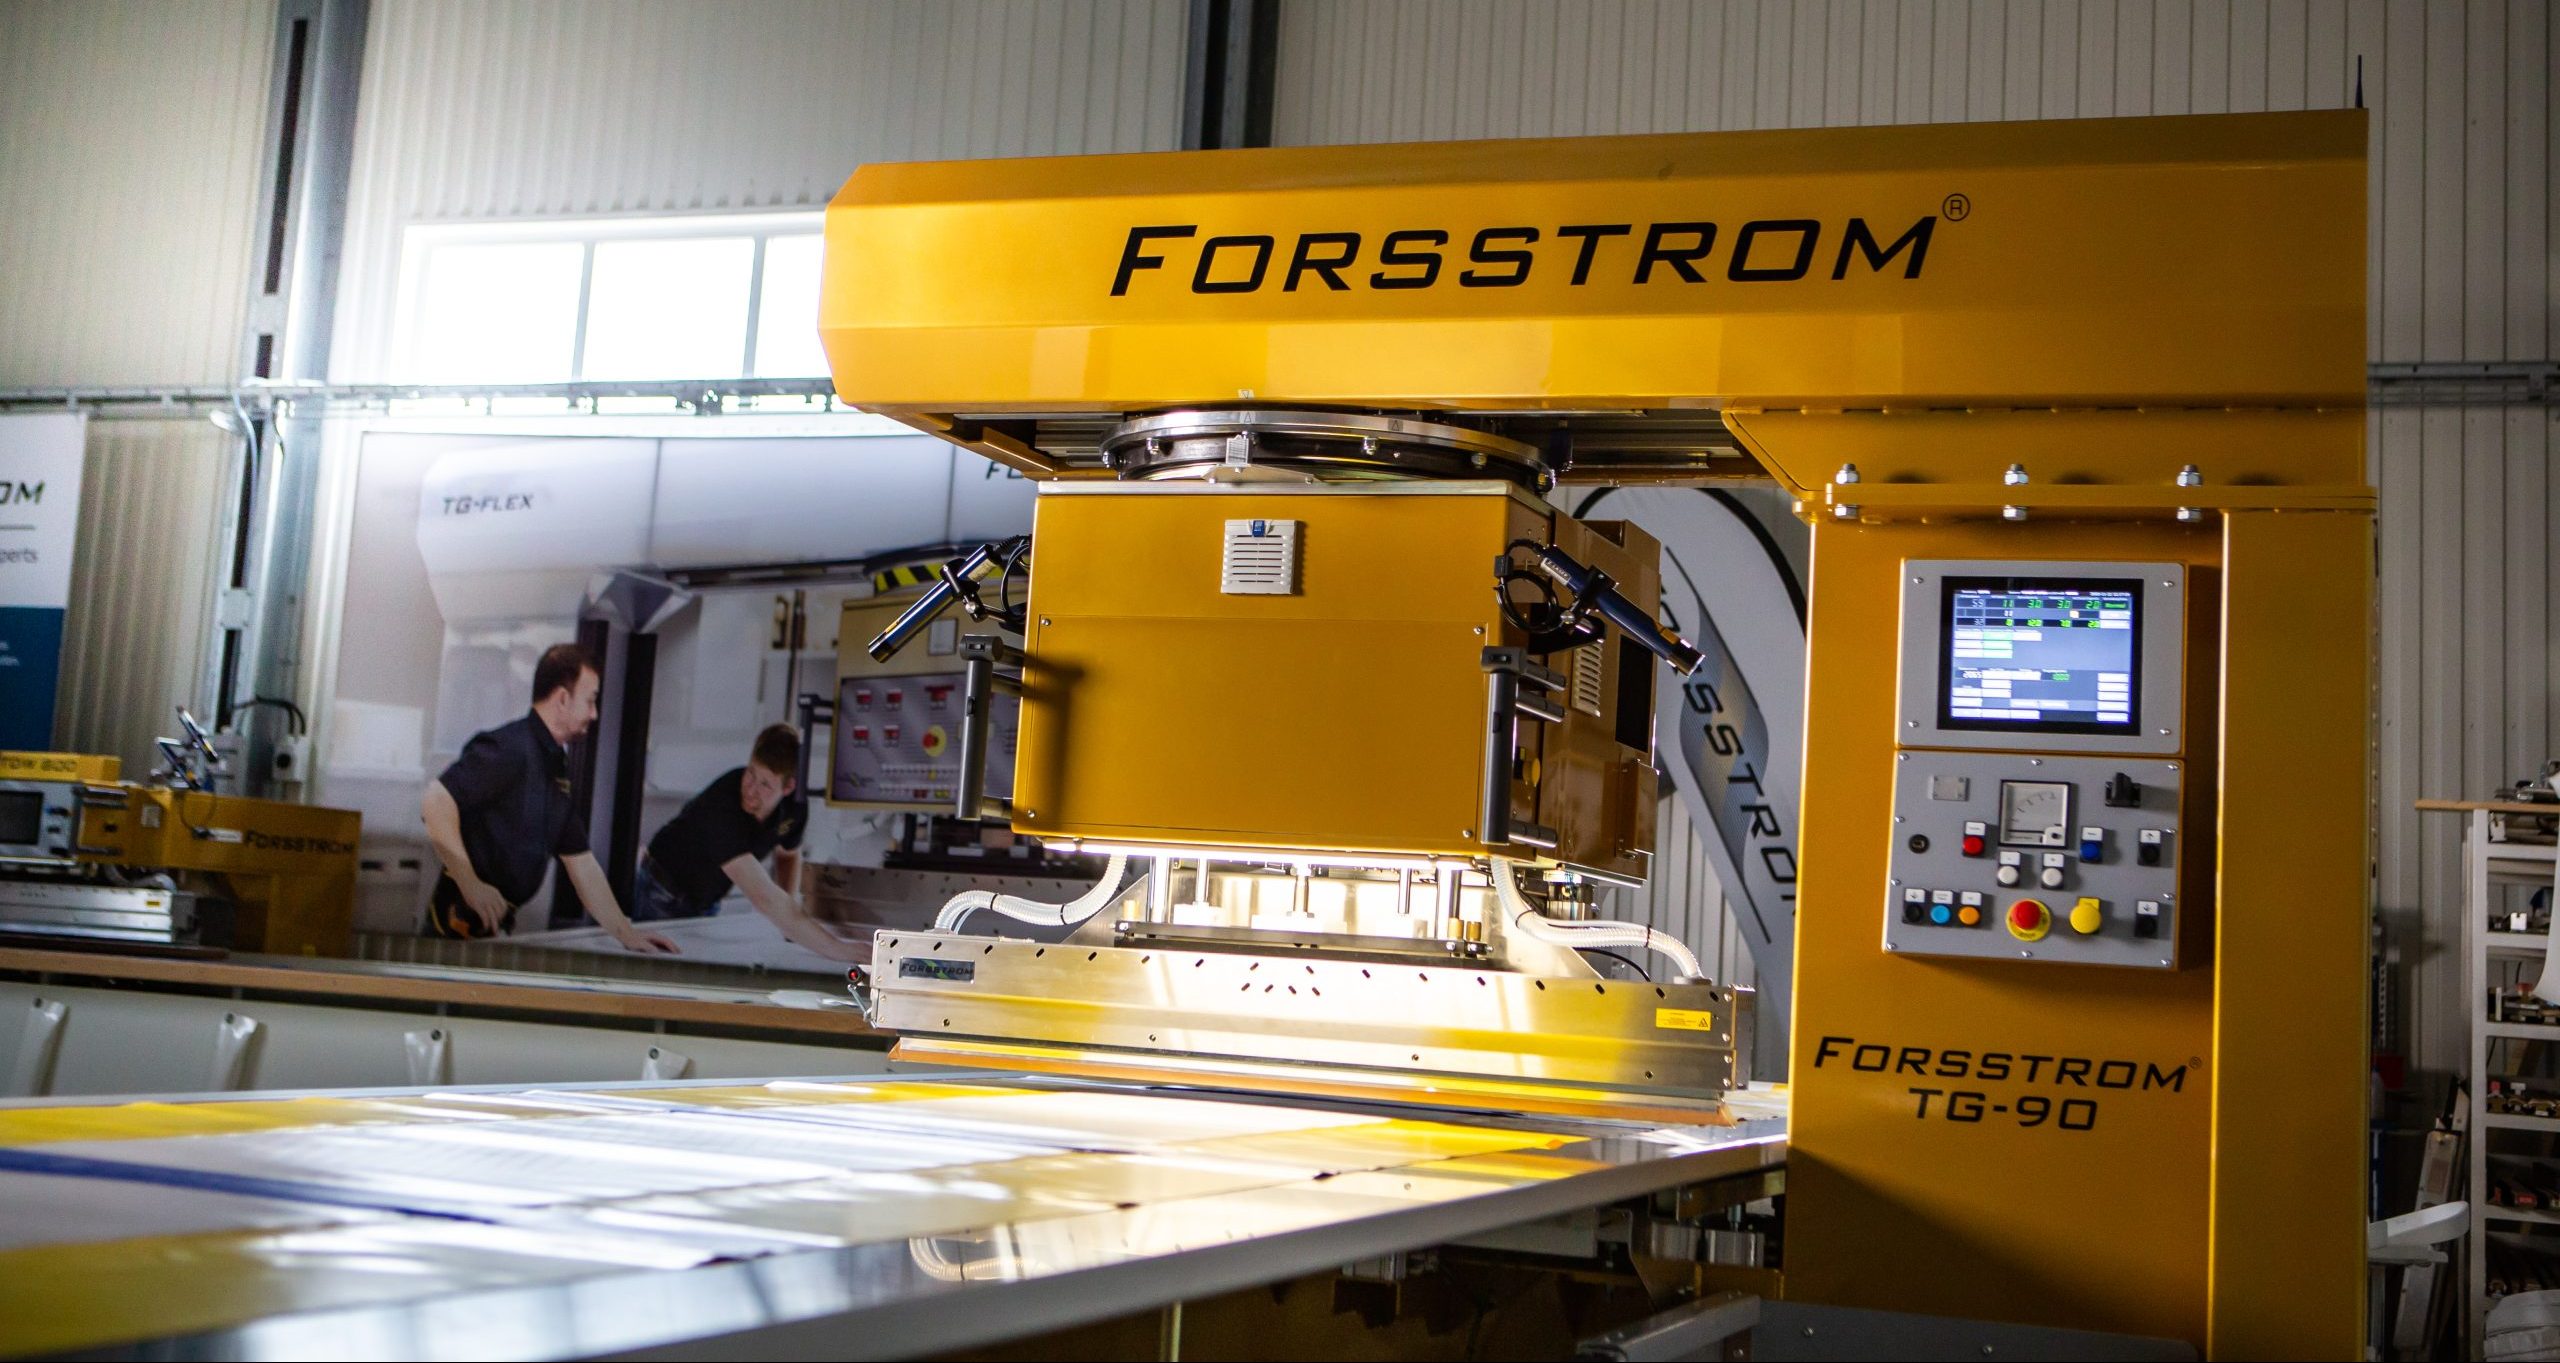 This is a picture of Forsstrom's TG-90 Mega high frequency welding machine.